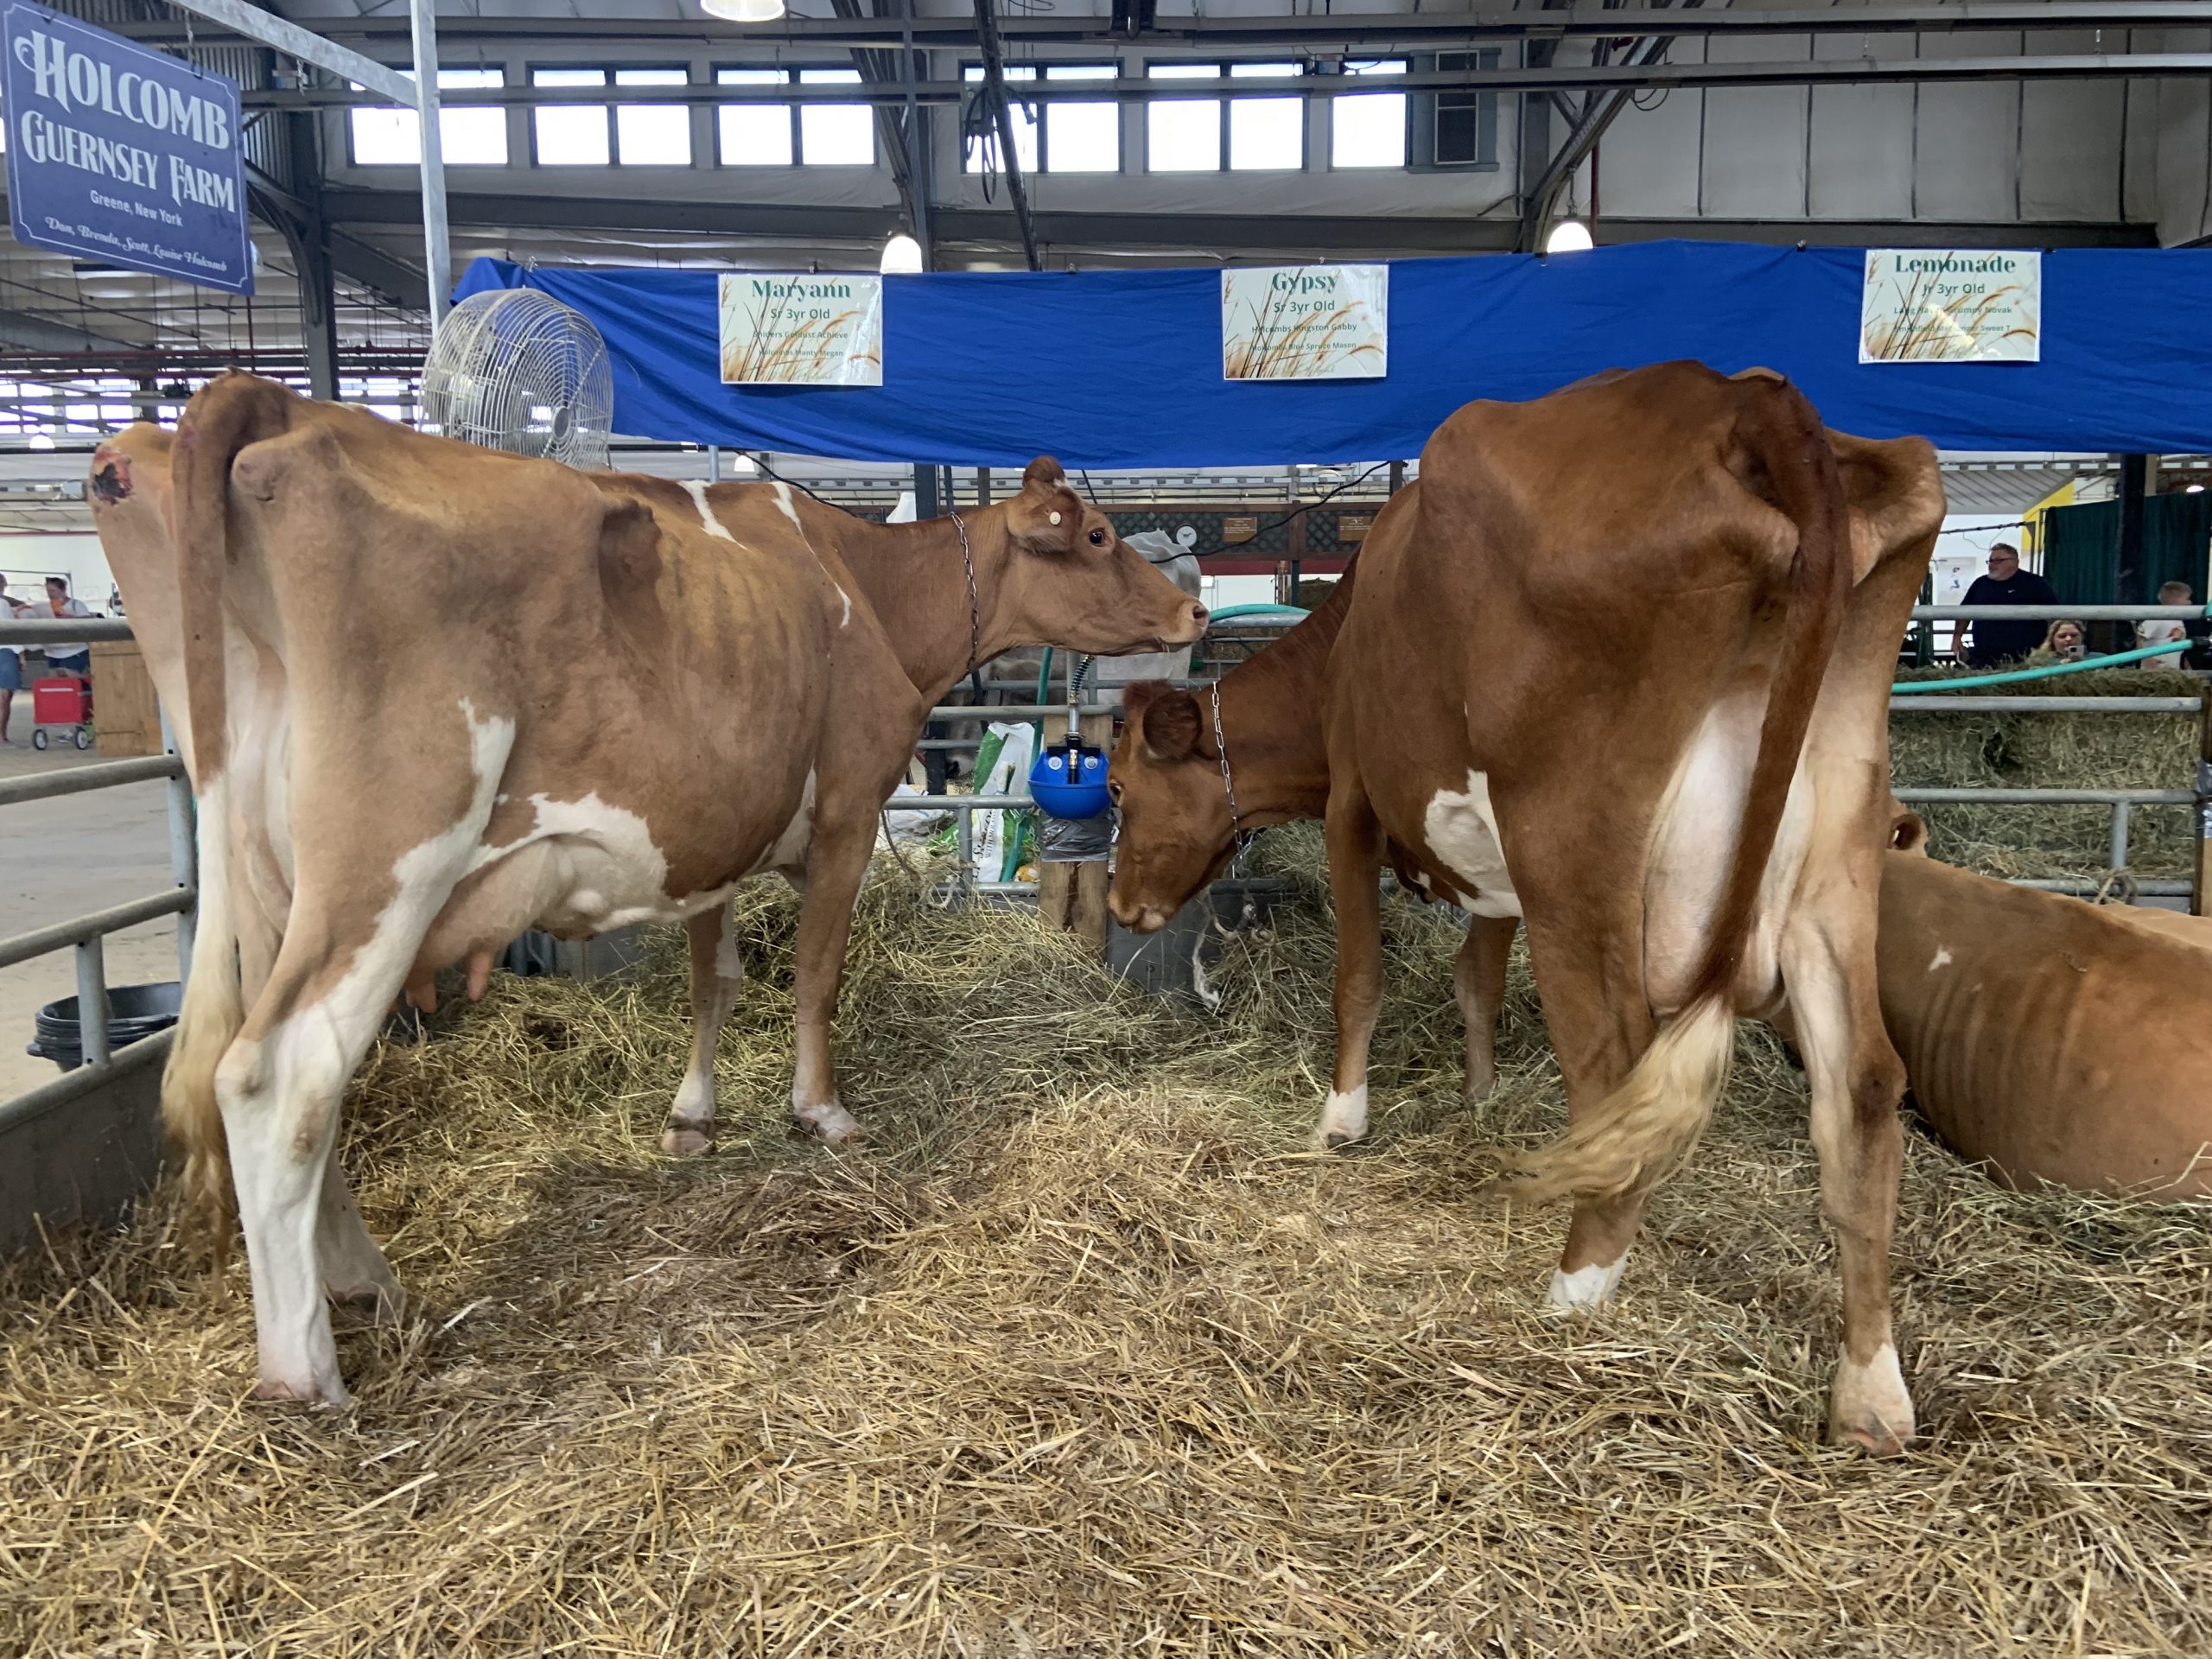 Cattle from the Holcomb Guernsey Farm enjoy a snack at the New York State Fairgrounds.